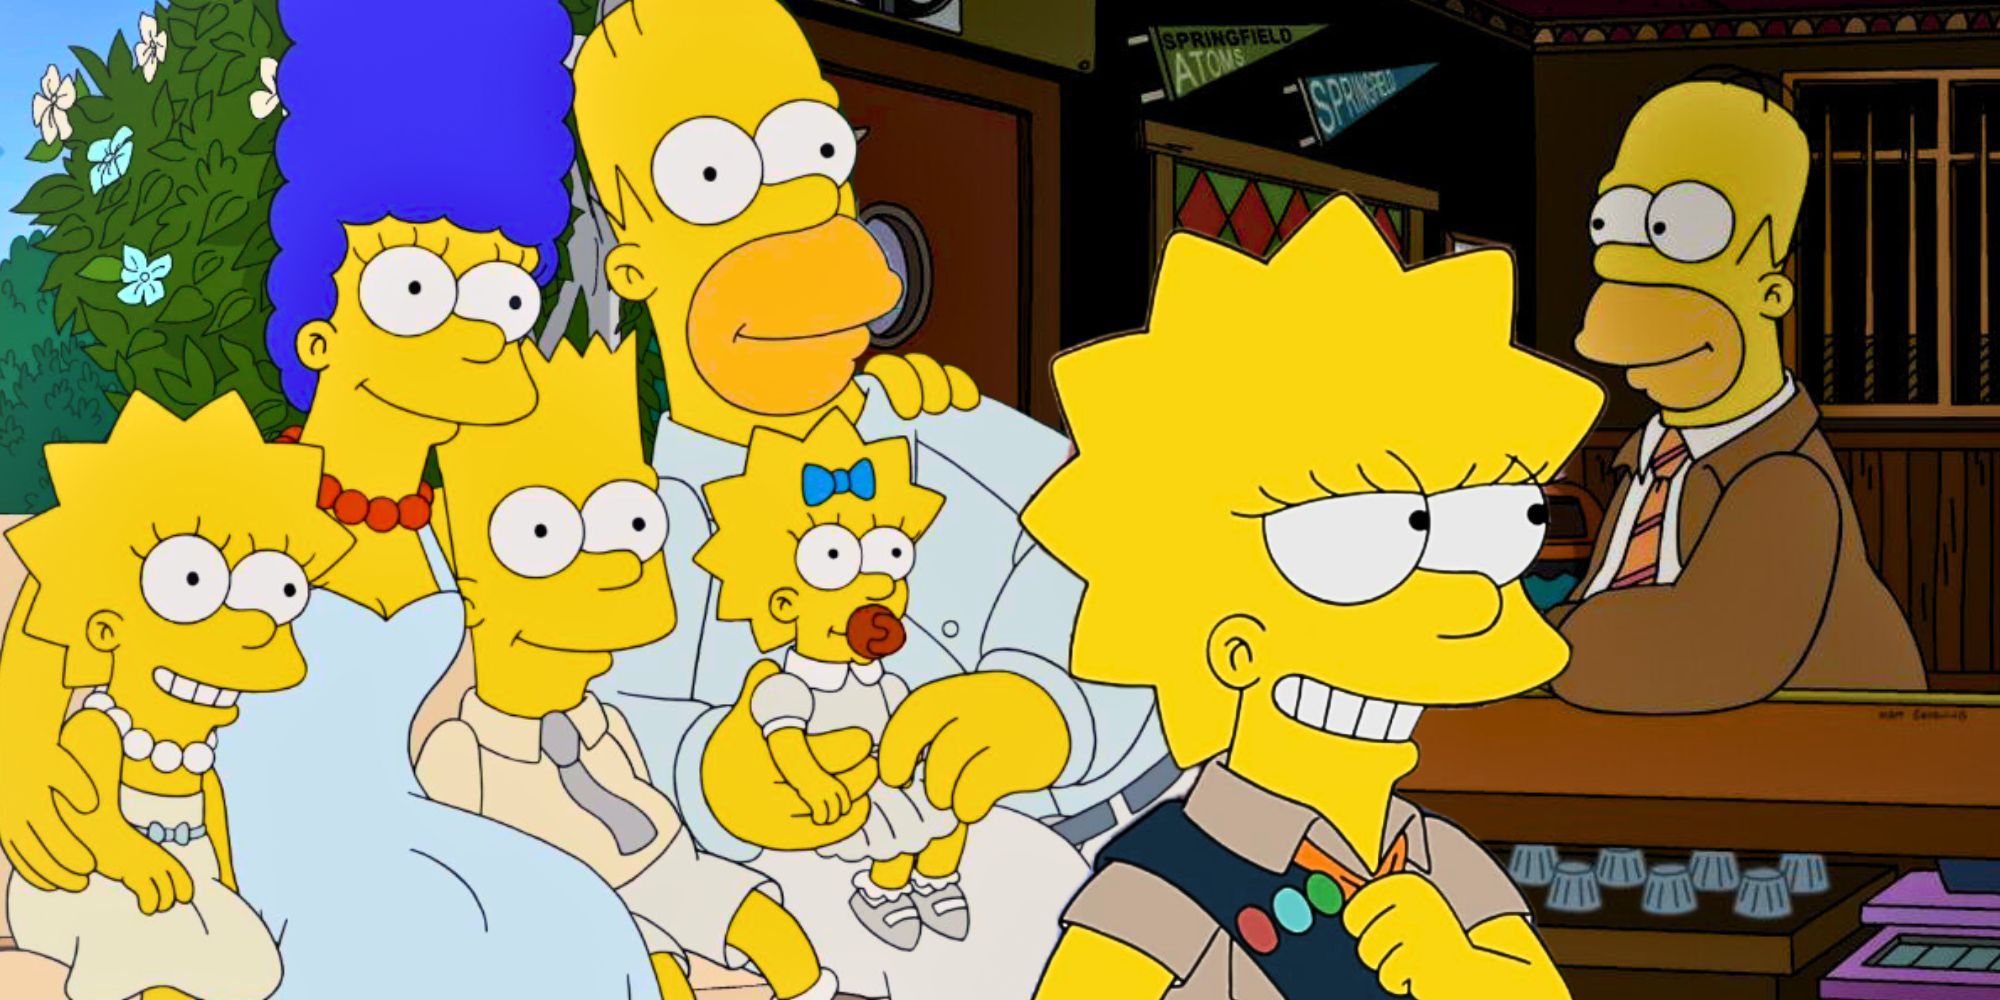 Images from 3 episodes of The Simpsons season 34